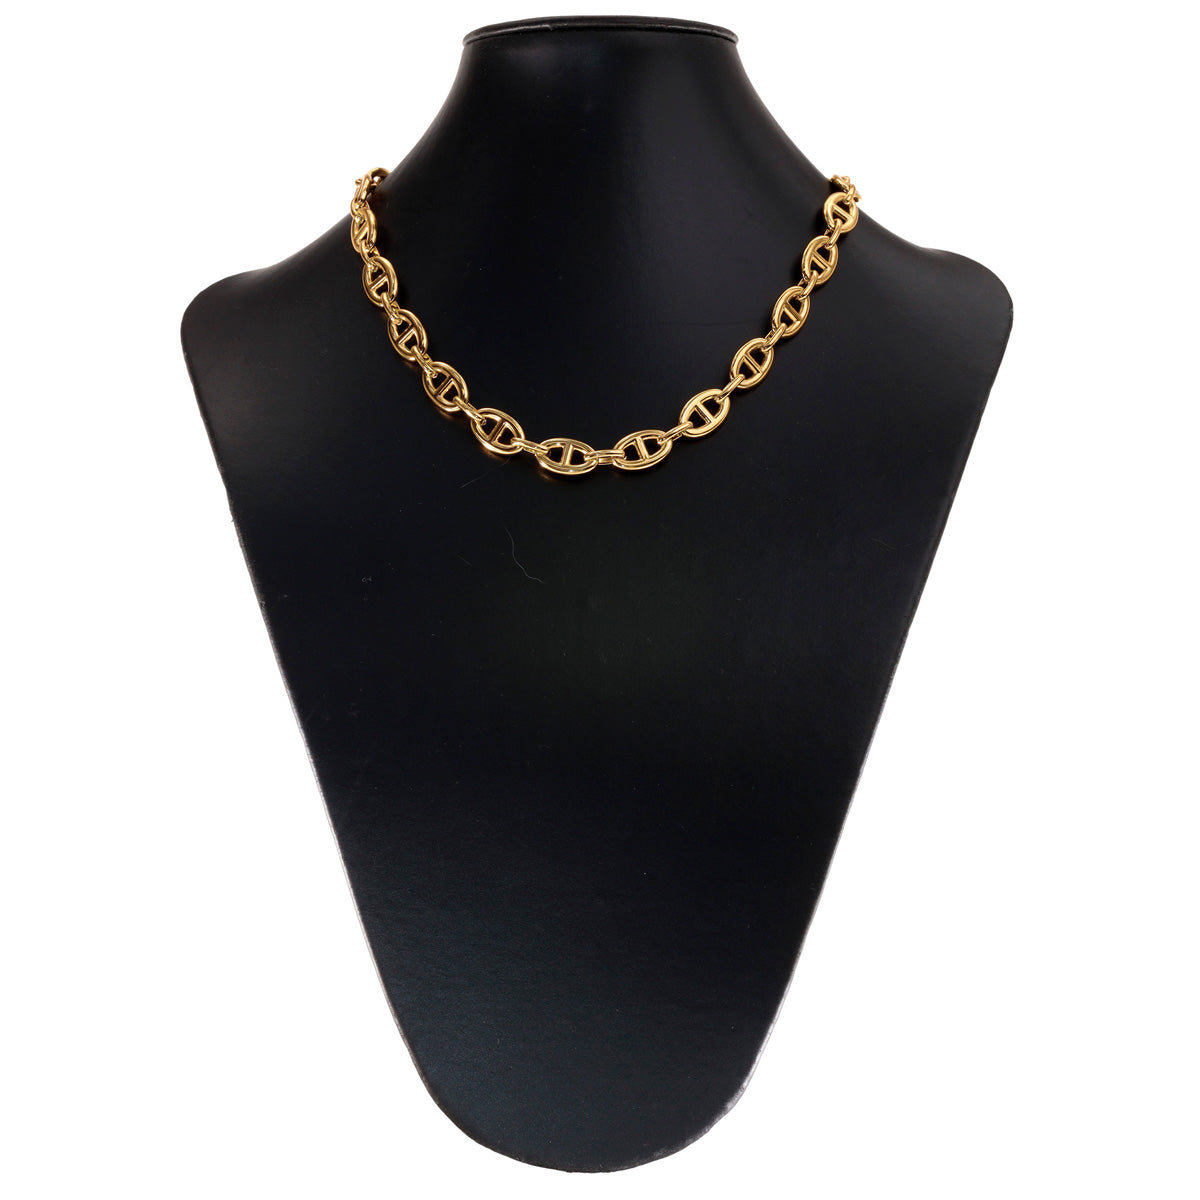 Oval steel chain necklace 43cm +5cm